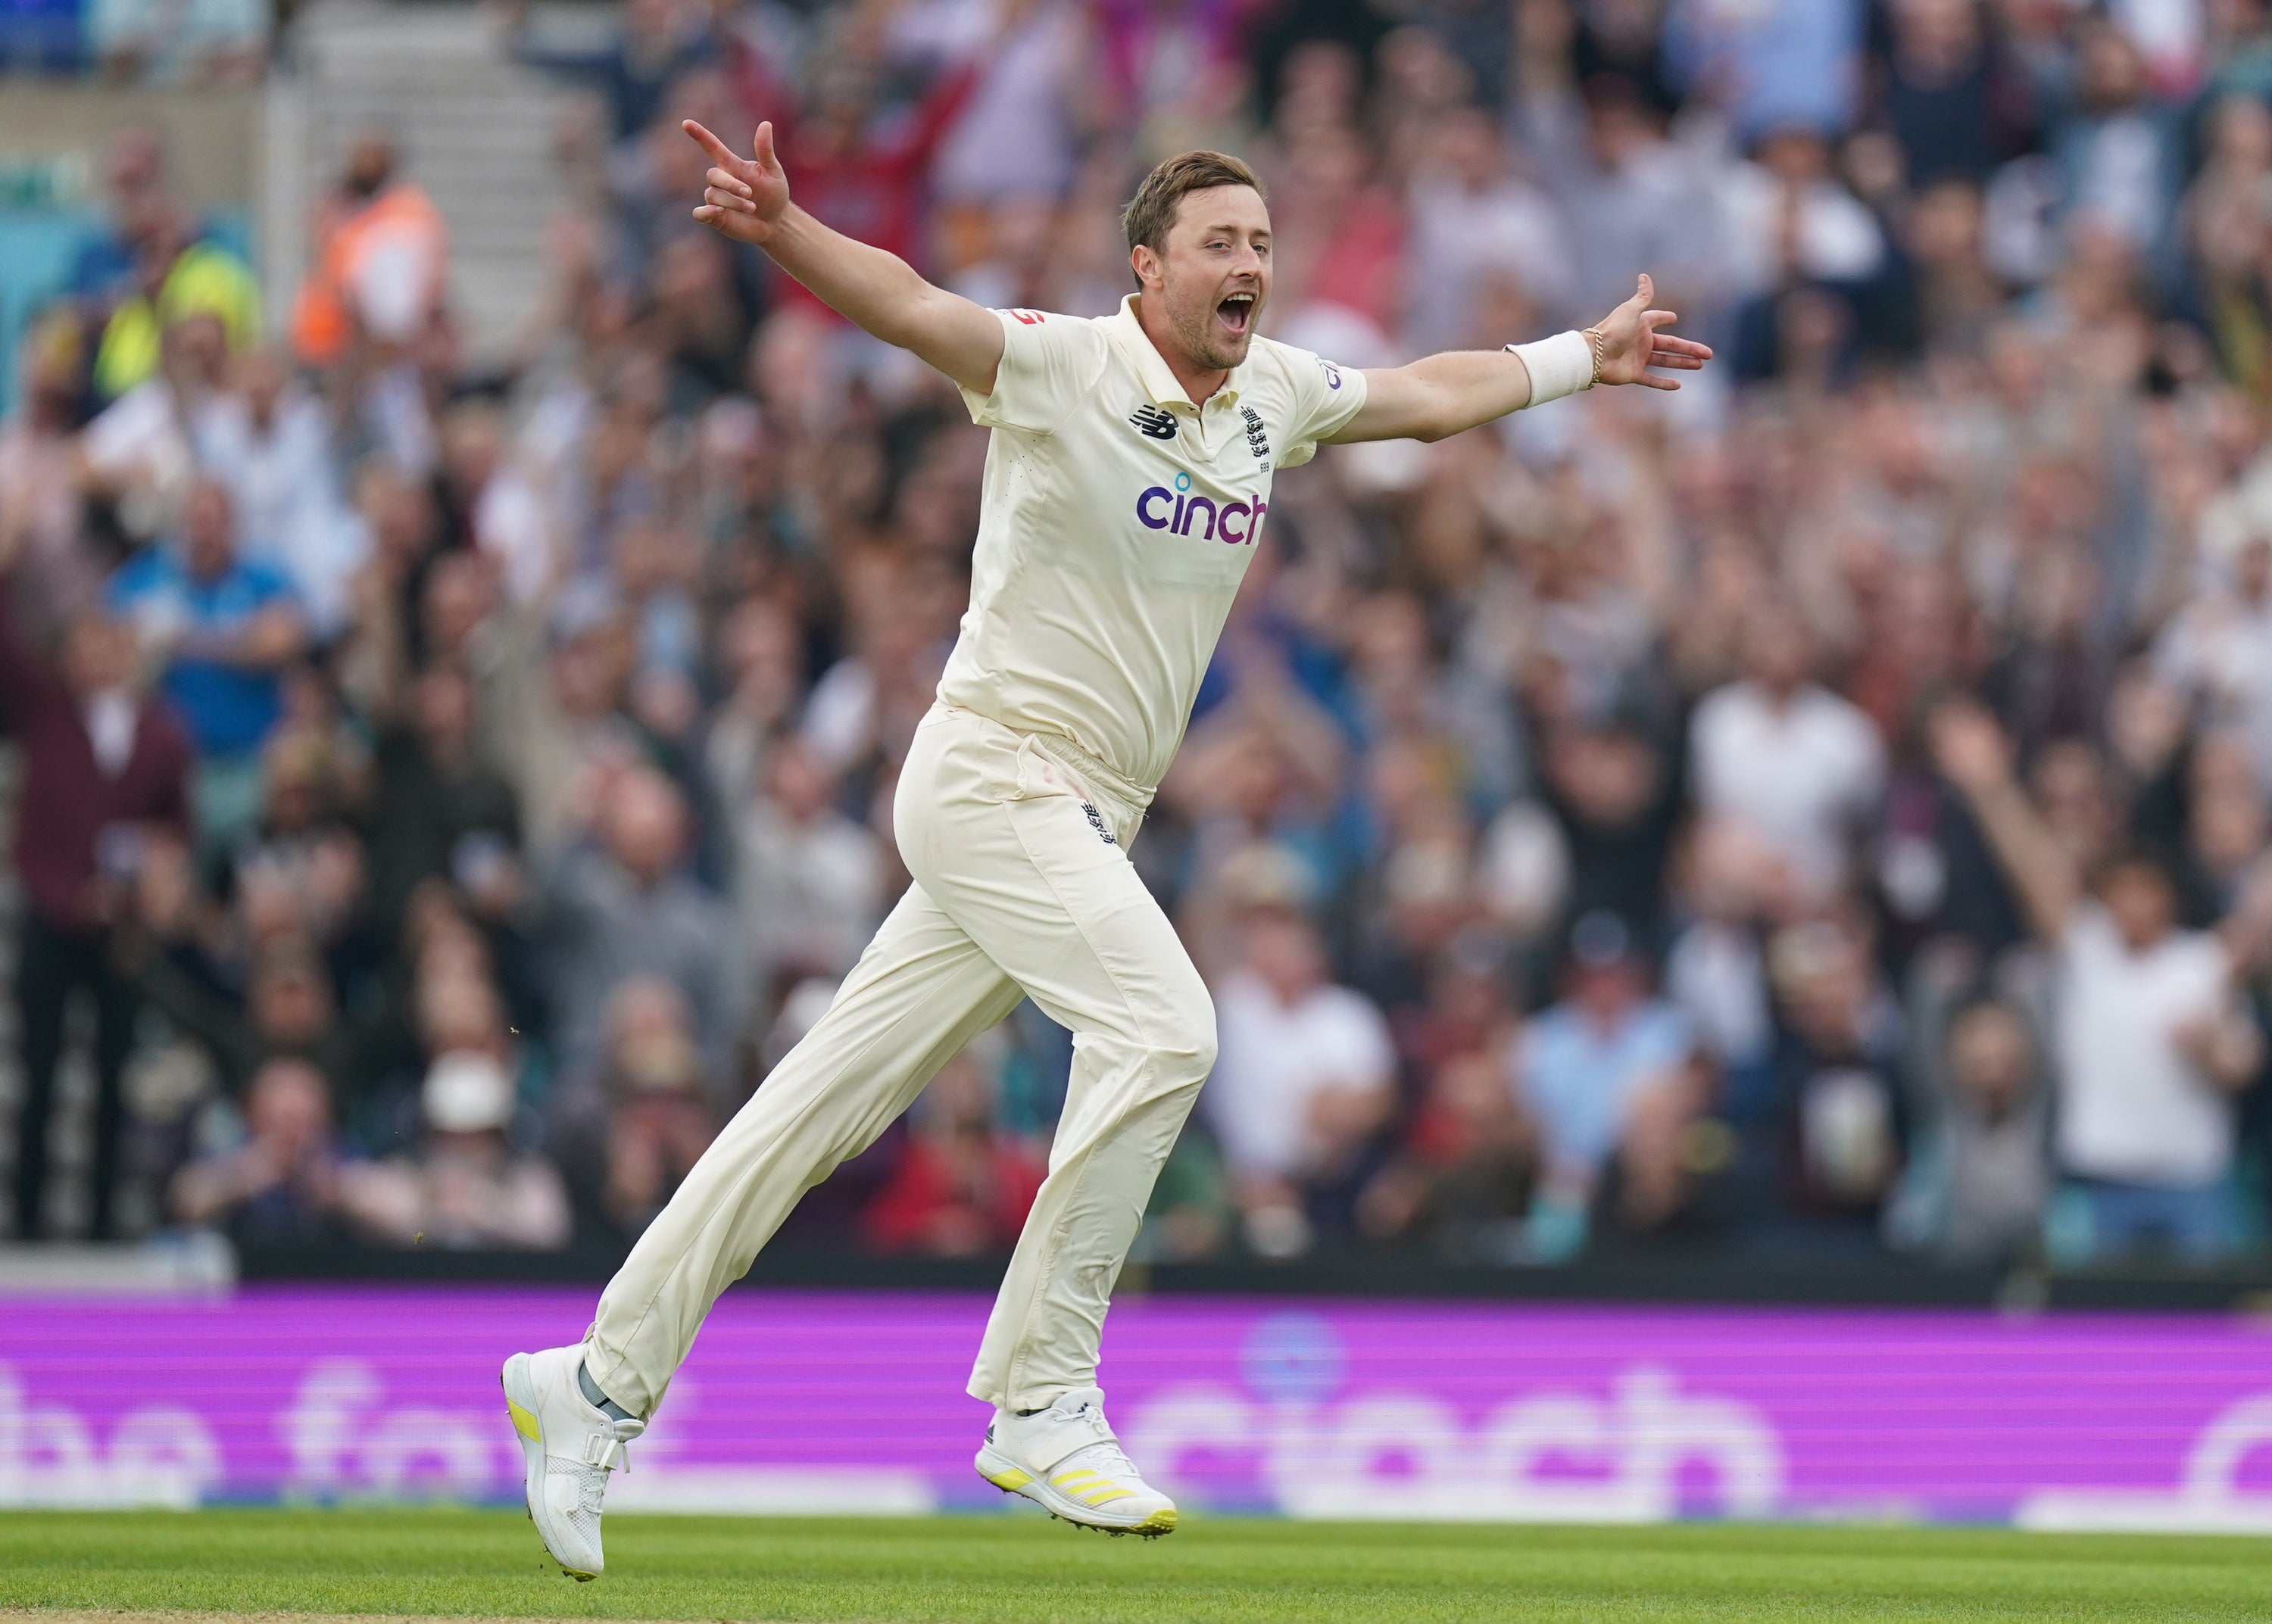 Ollie Robinson celebrates taking a wicket against India at the Oval on Sunday (Adam Davy/PA)